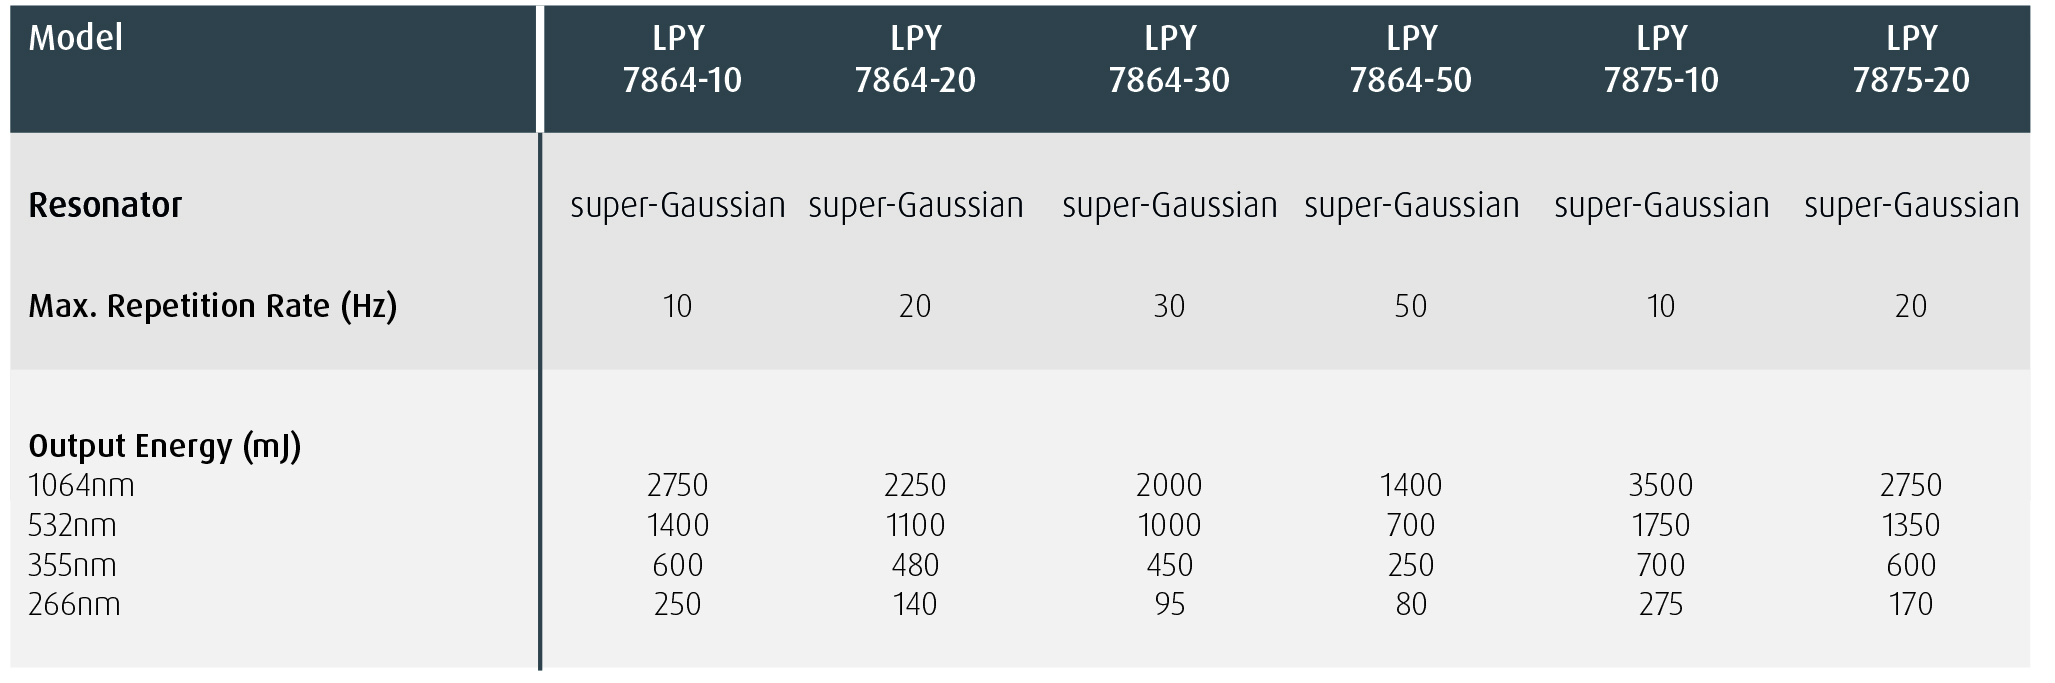 LPY7000 Specification highlights